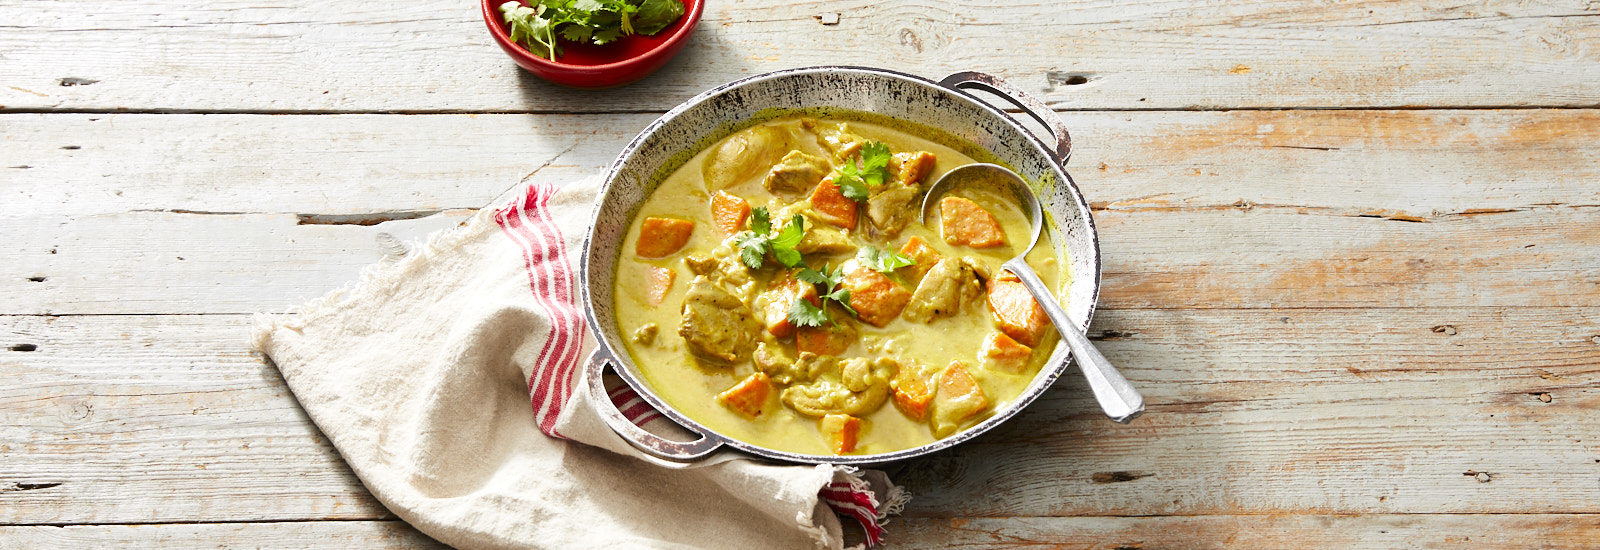 CAMPBELLS CHICKEN CURRY RECIPE